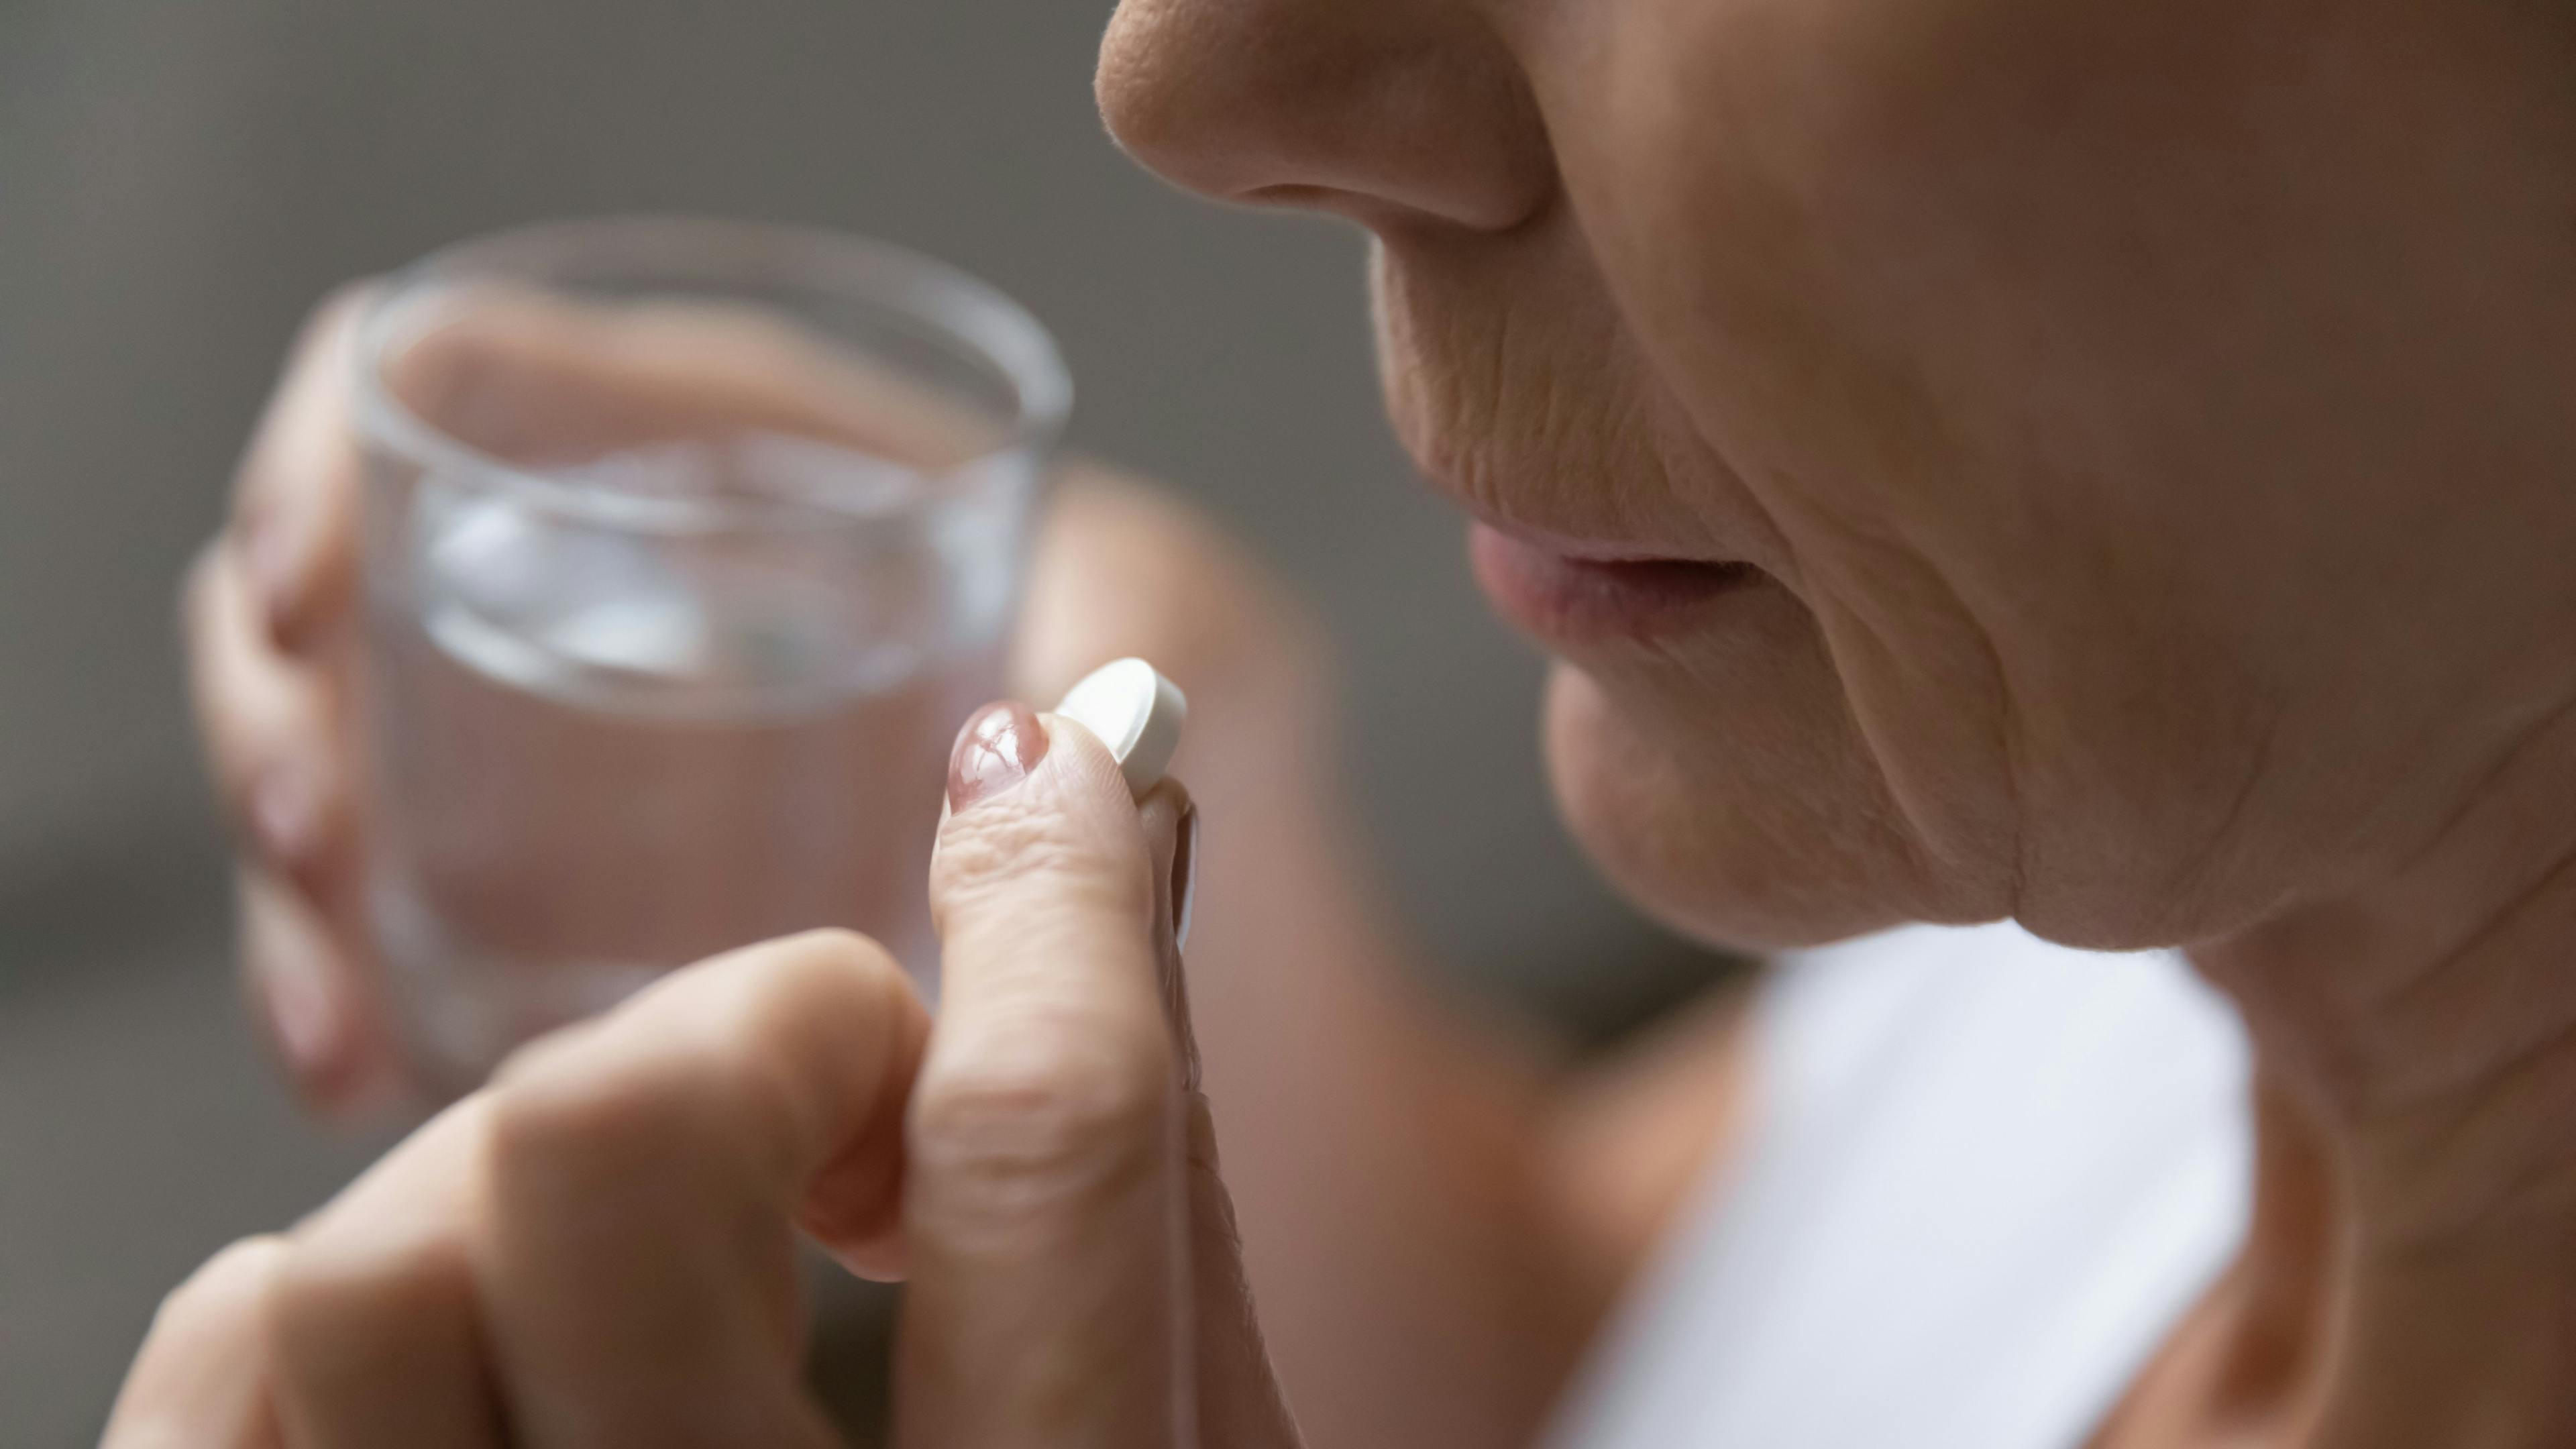 Pharmacist-Led Deprescribing Efforts Can Reduce Inappropriate Aspirin Use in Older Adults